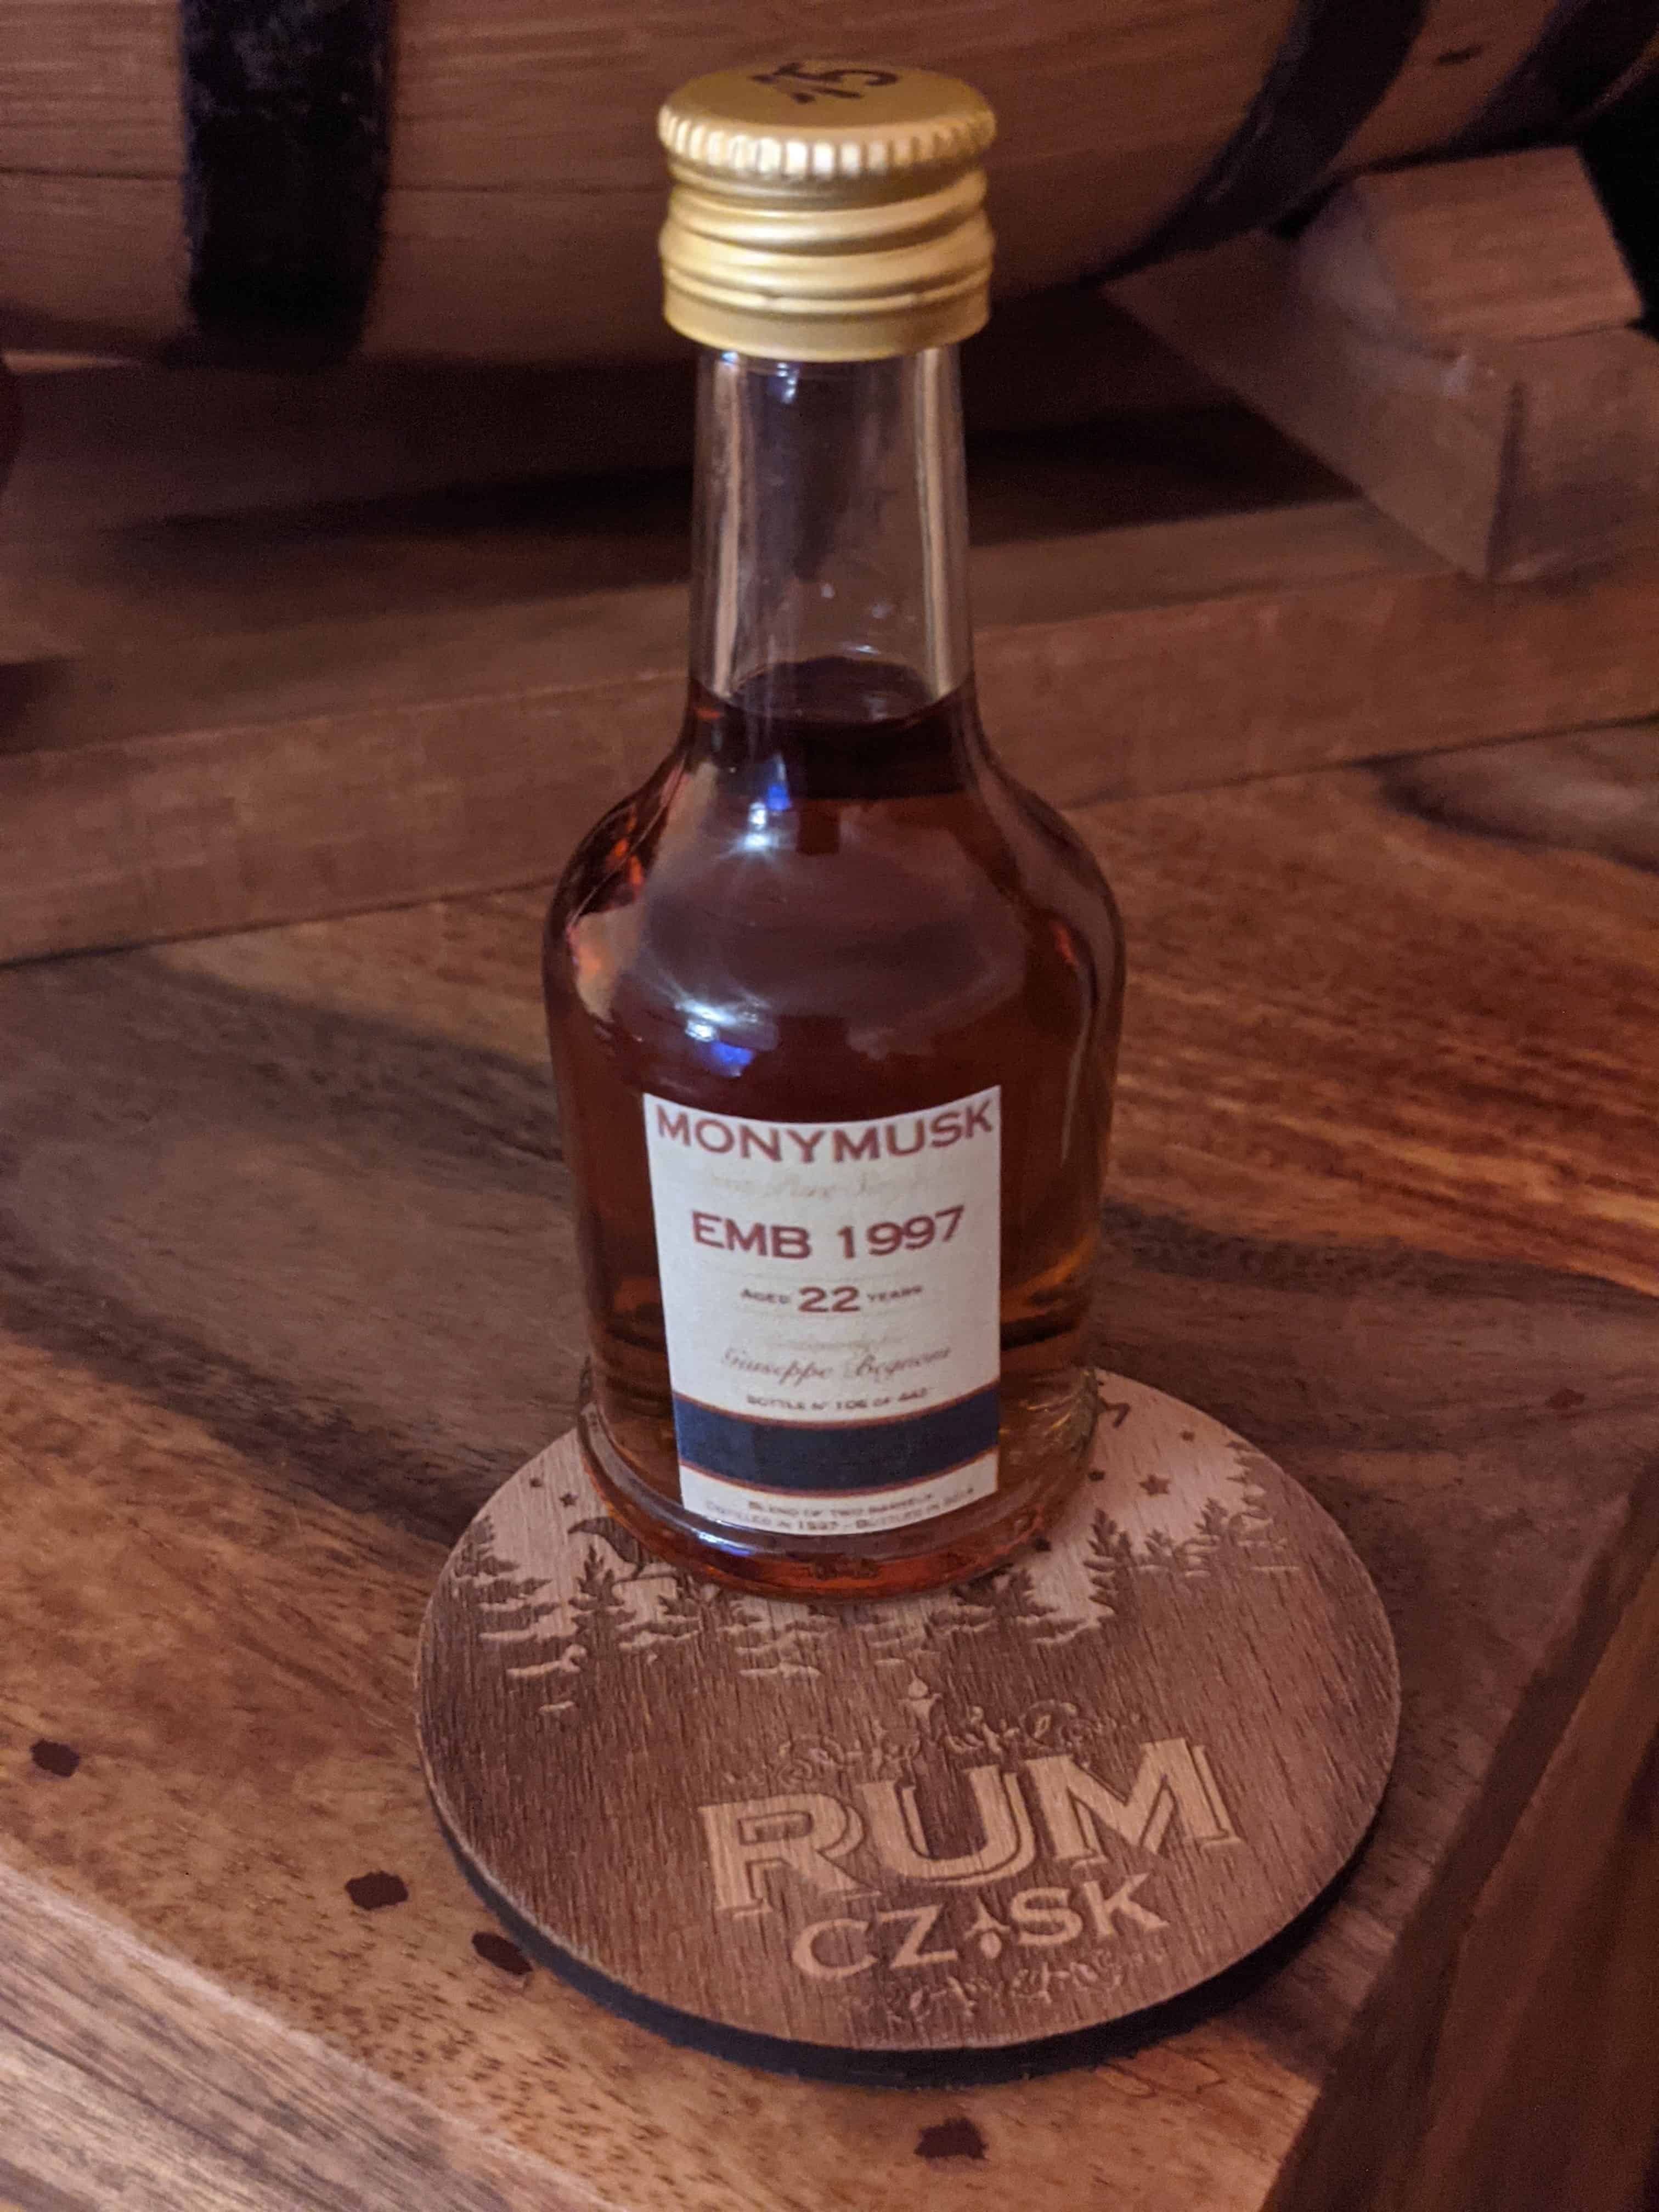 Monymusk EMB 1997 Exclusively for Guiseppe Begnoni (rumový kalendář The Rum Cartel)